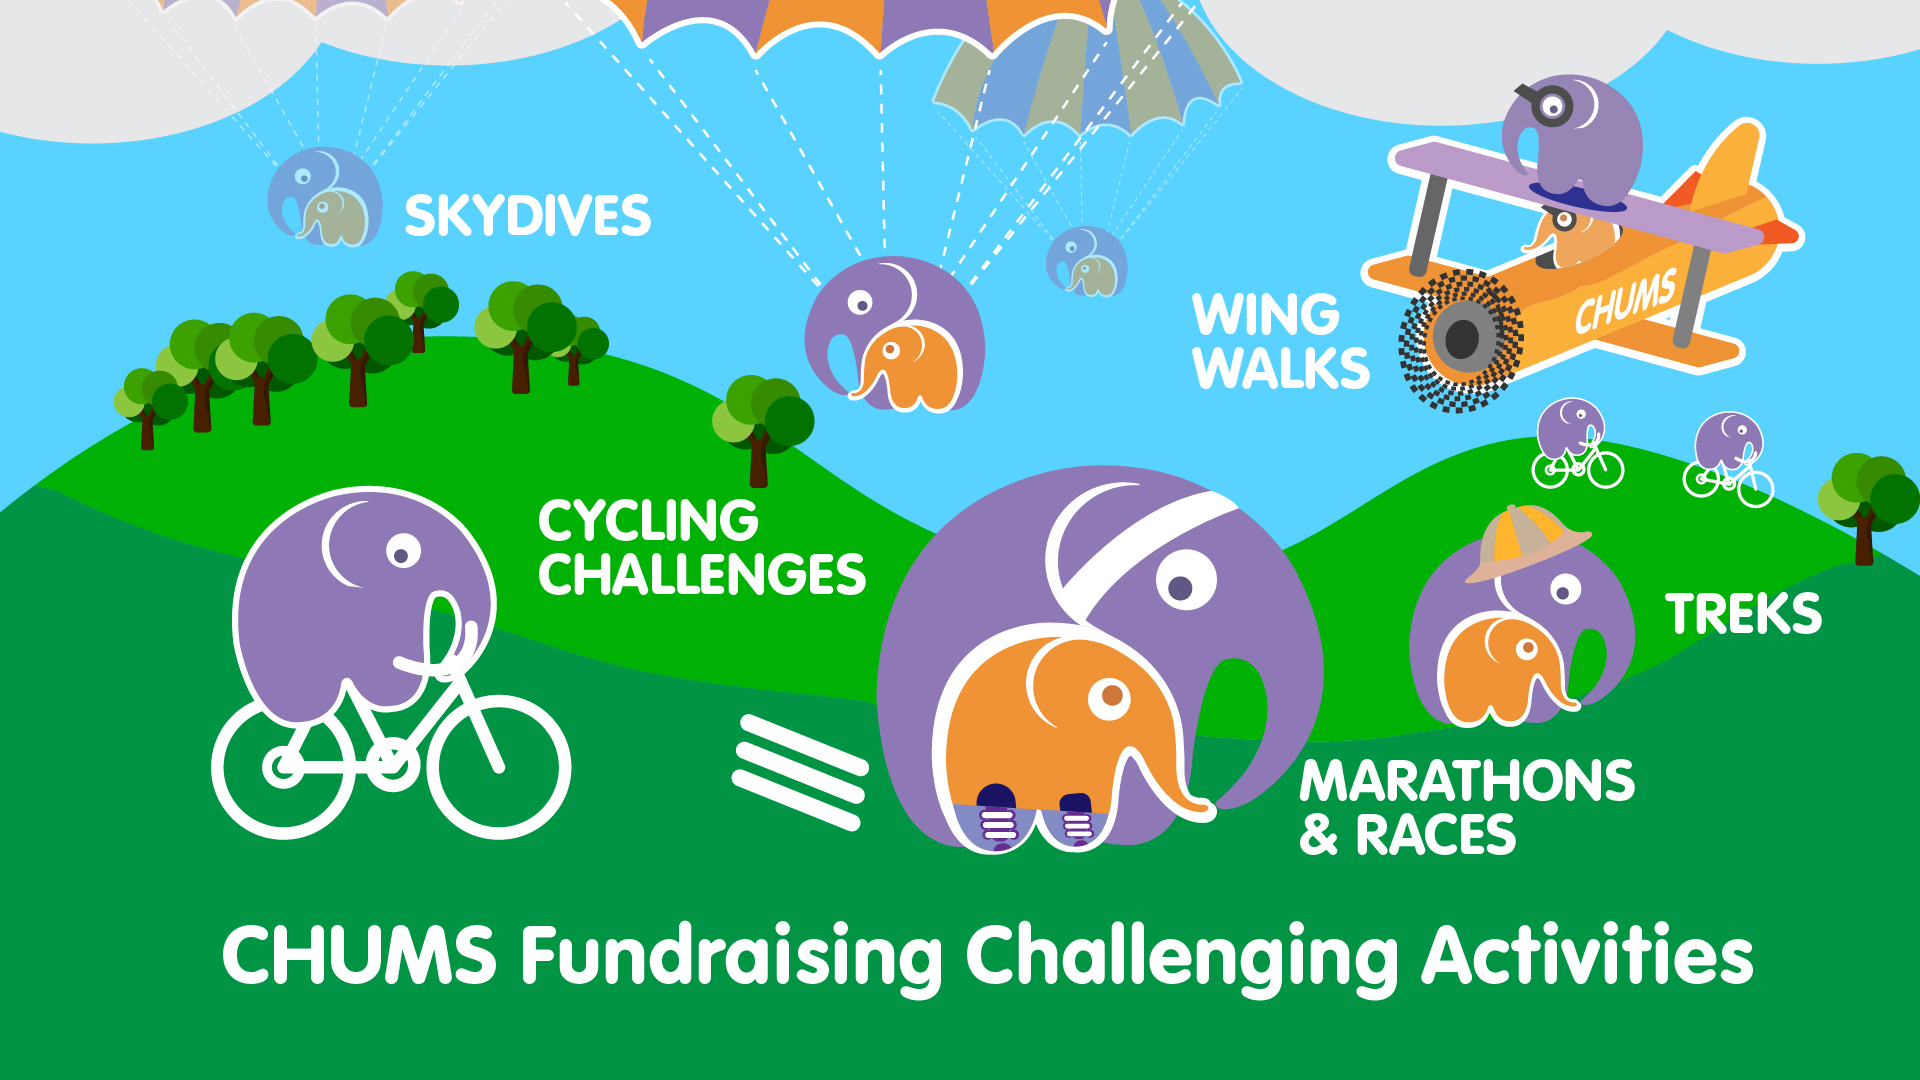 CHUMS Fundraising Challenging Activities